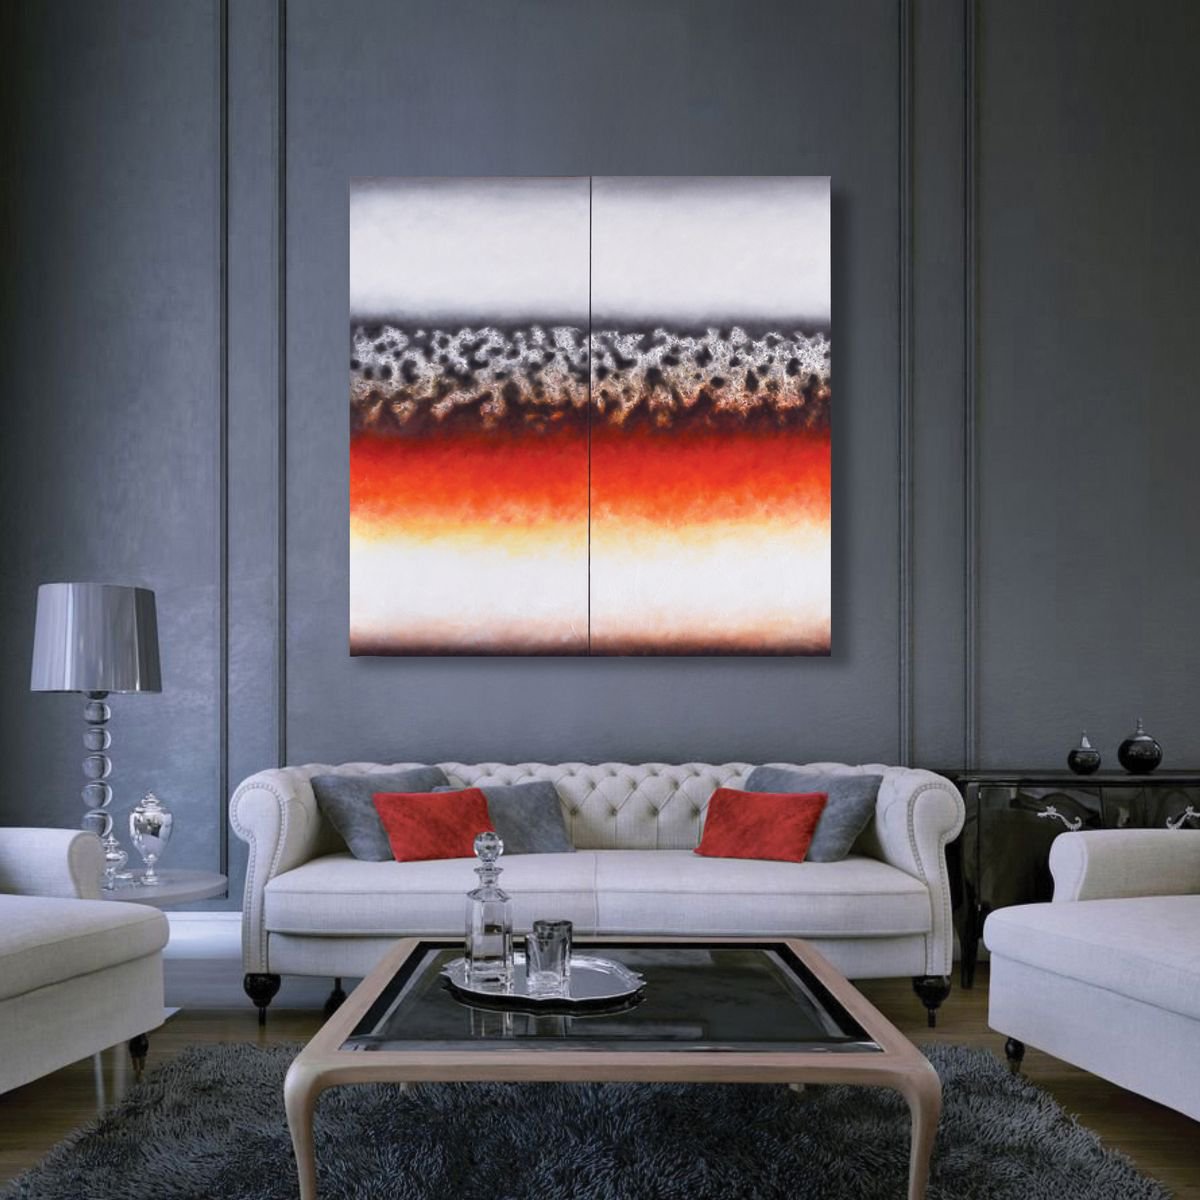 120A�120 Diptych White/Black/Red/Silver Large Abstract Wall Decor Oil Painting by Waldemar Kaliczak